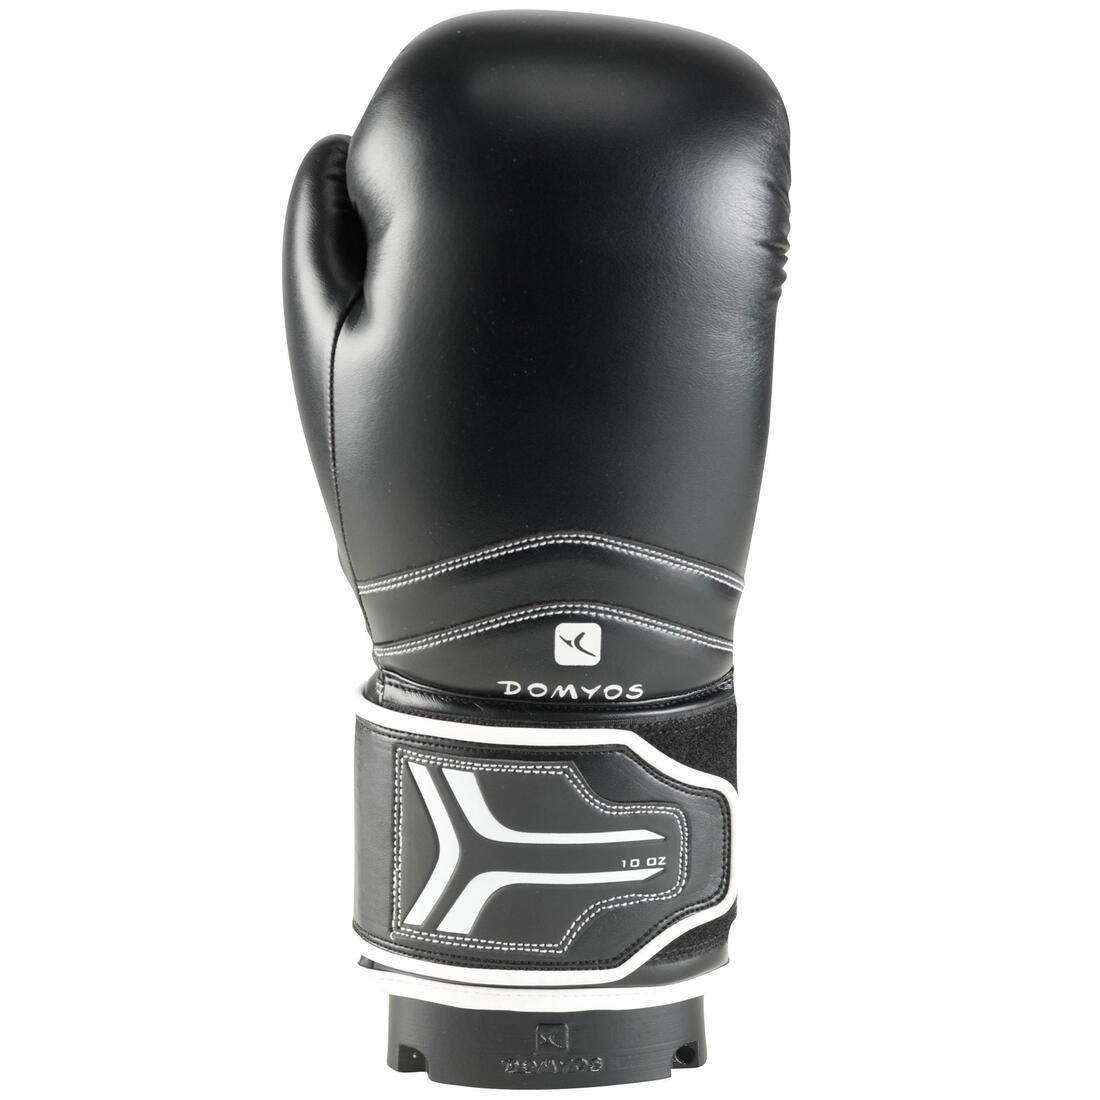 OUTSHOCK - Pair of Boxing Glove Dryers